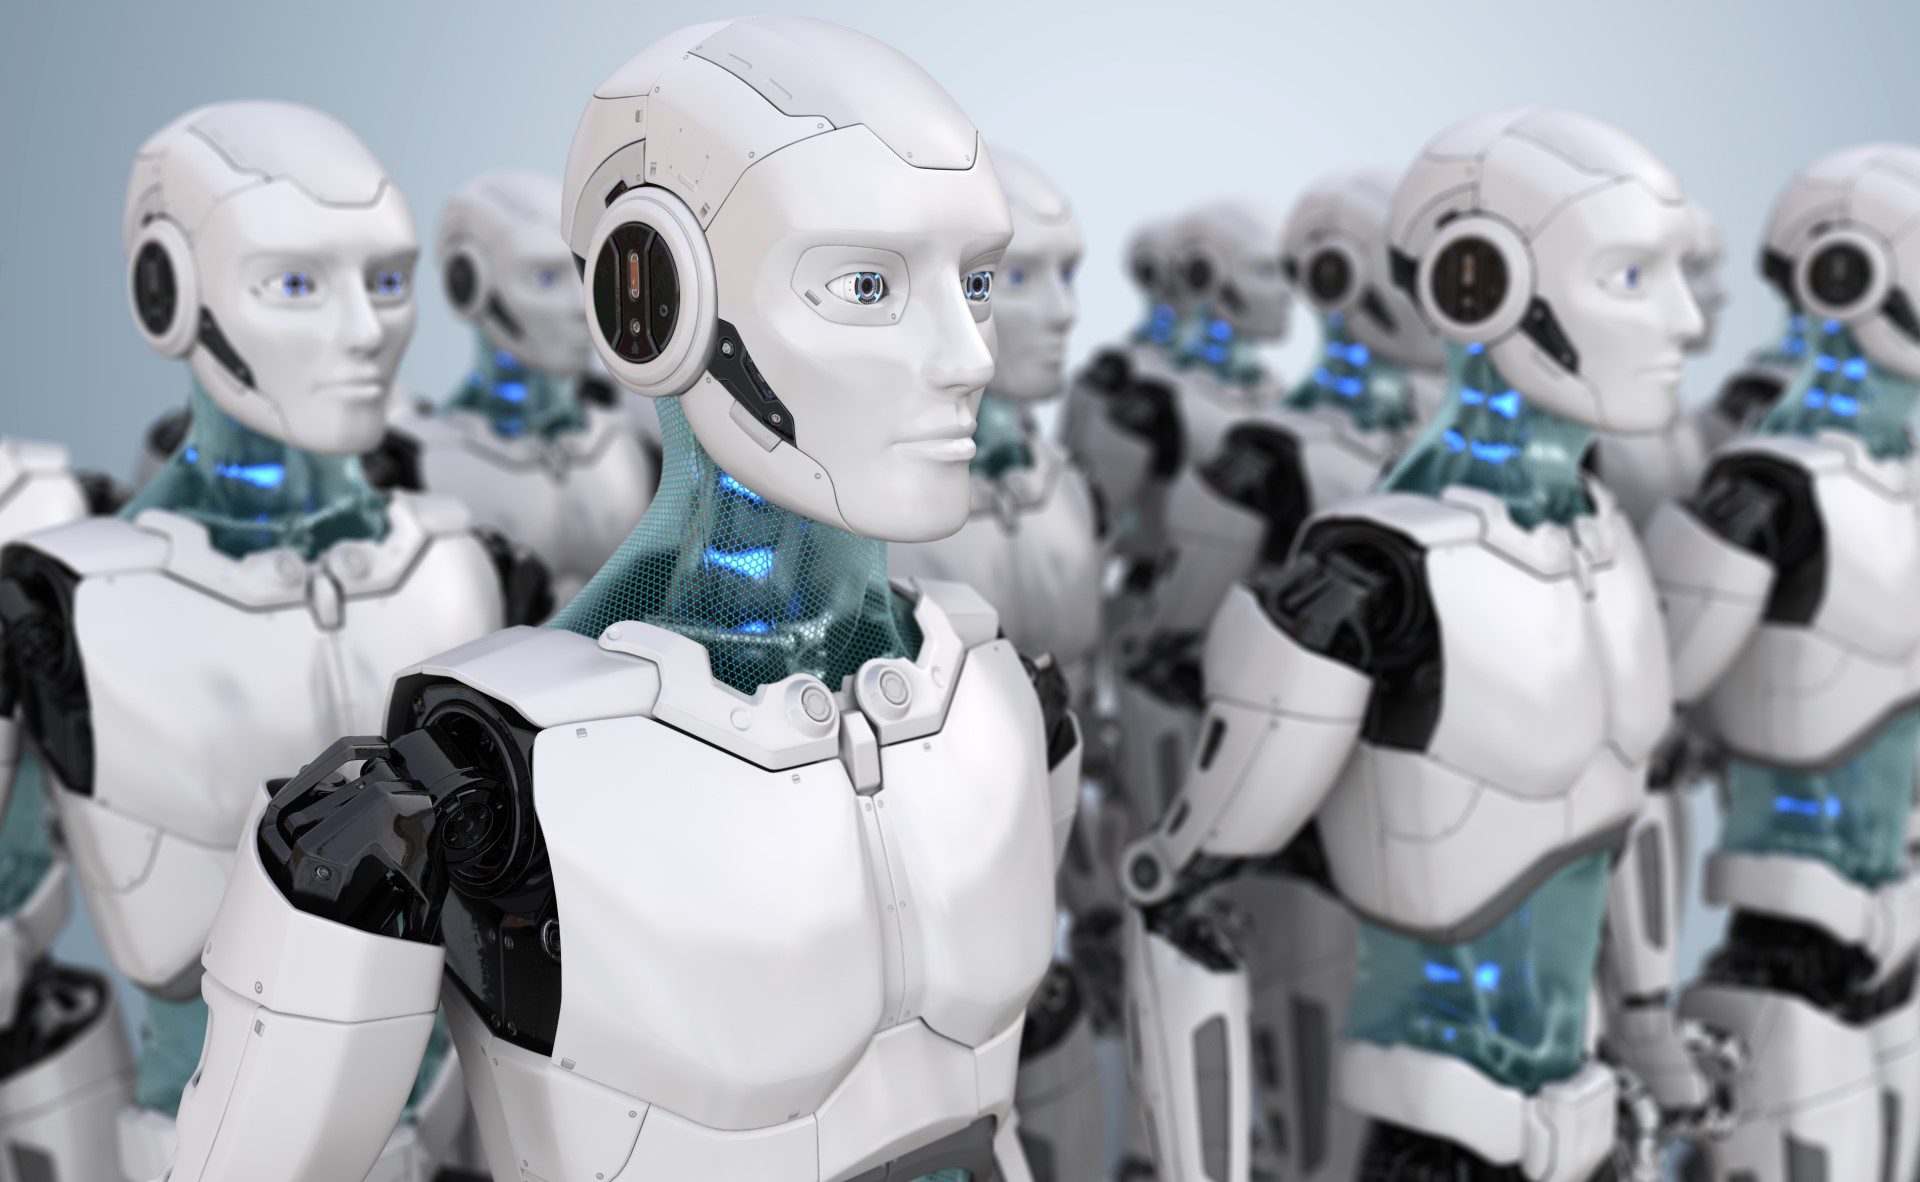 Robots androids hybrid digital workplace of the future